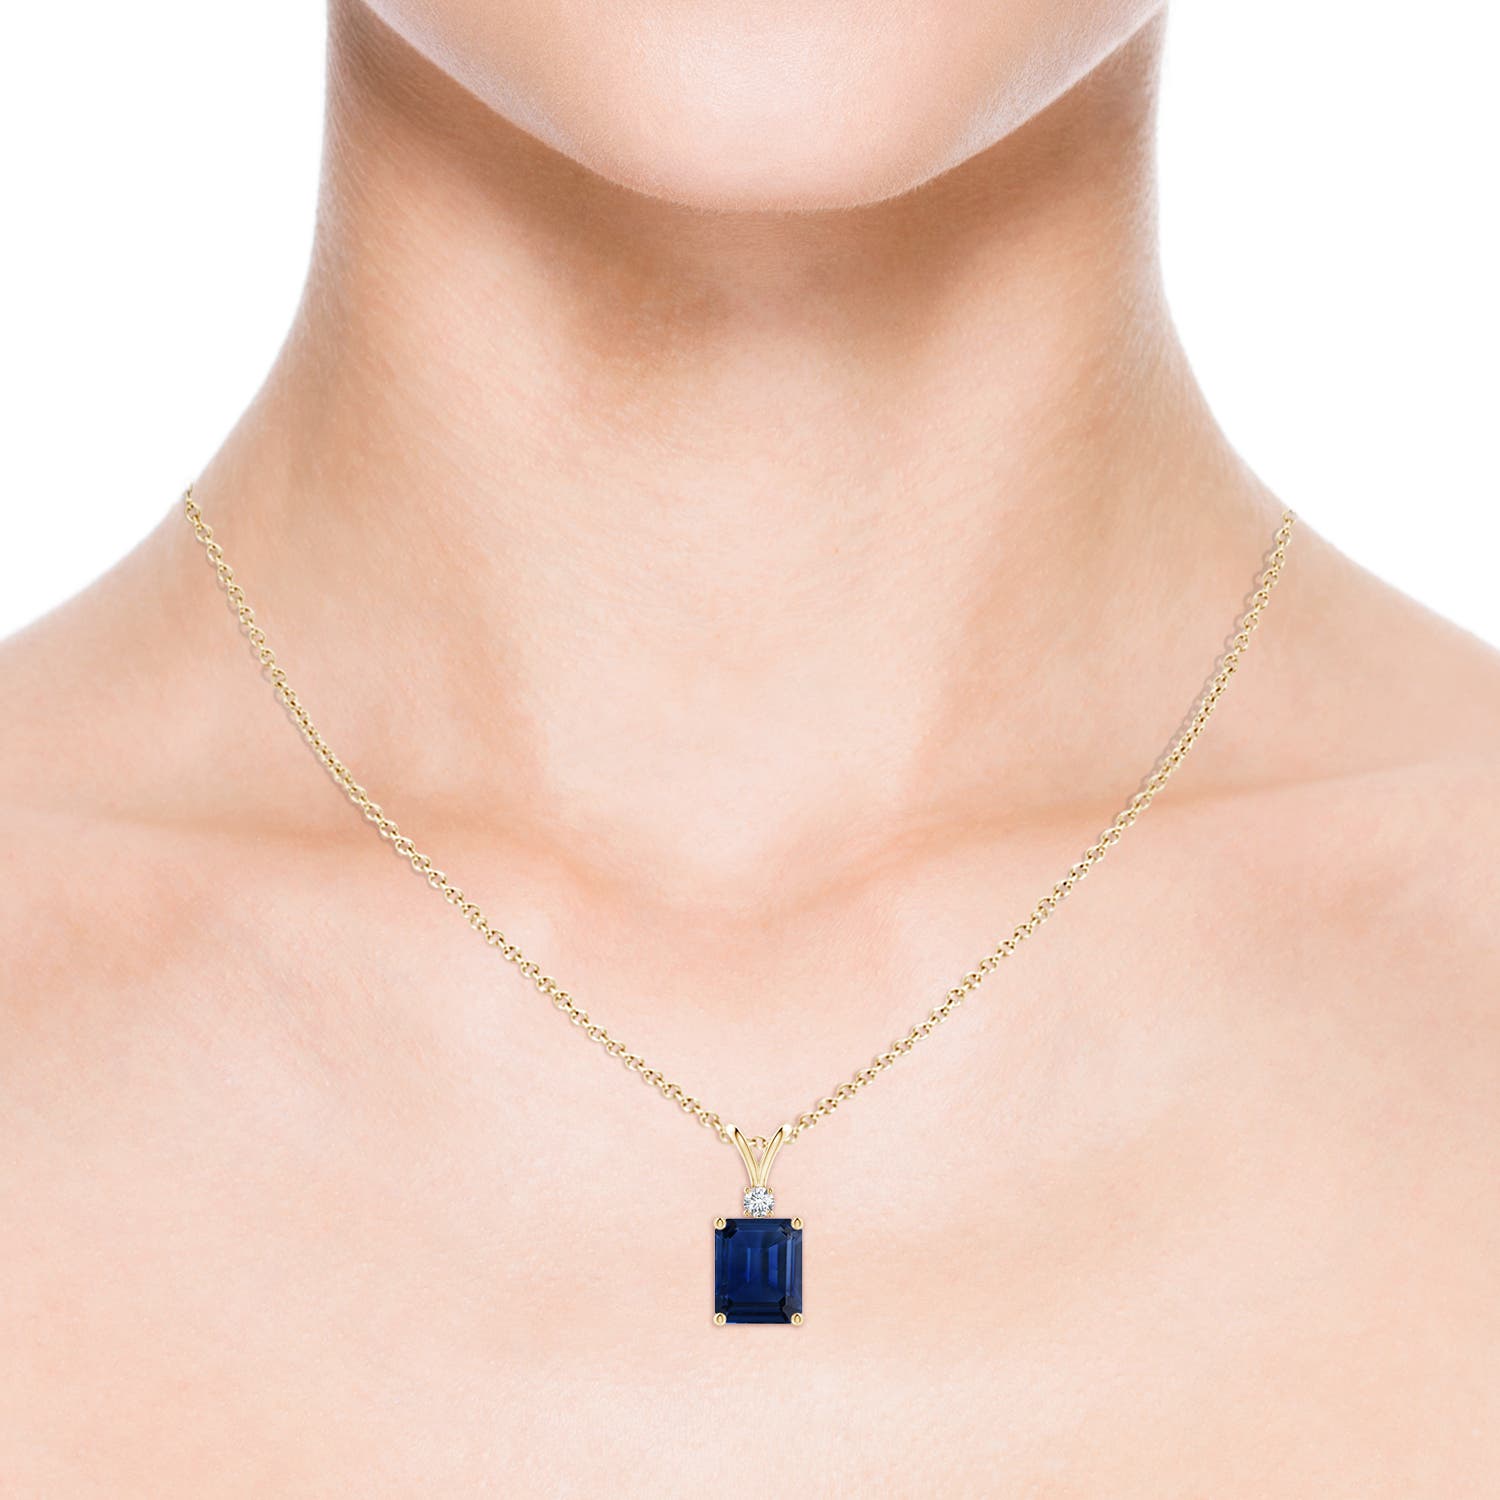 AAA - Blue Sapphire / 5.66 CT / 14 KT Yellow Gold